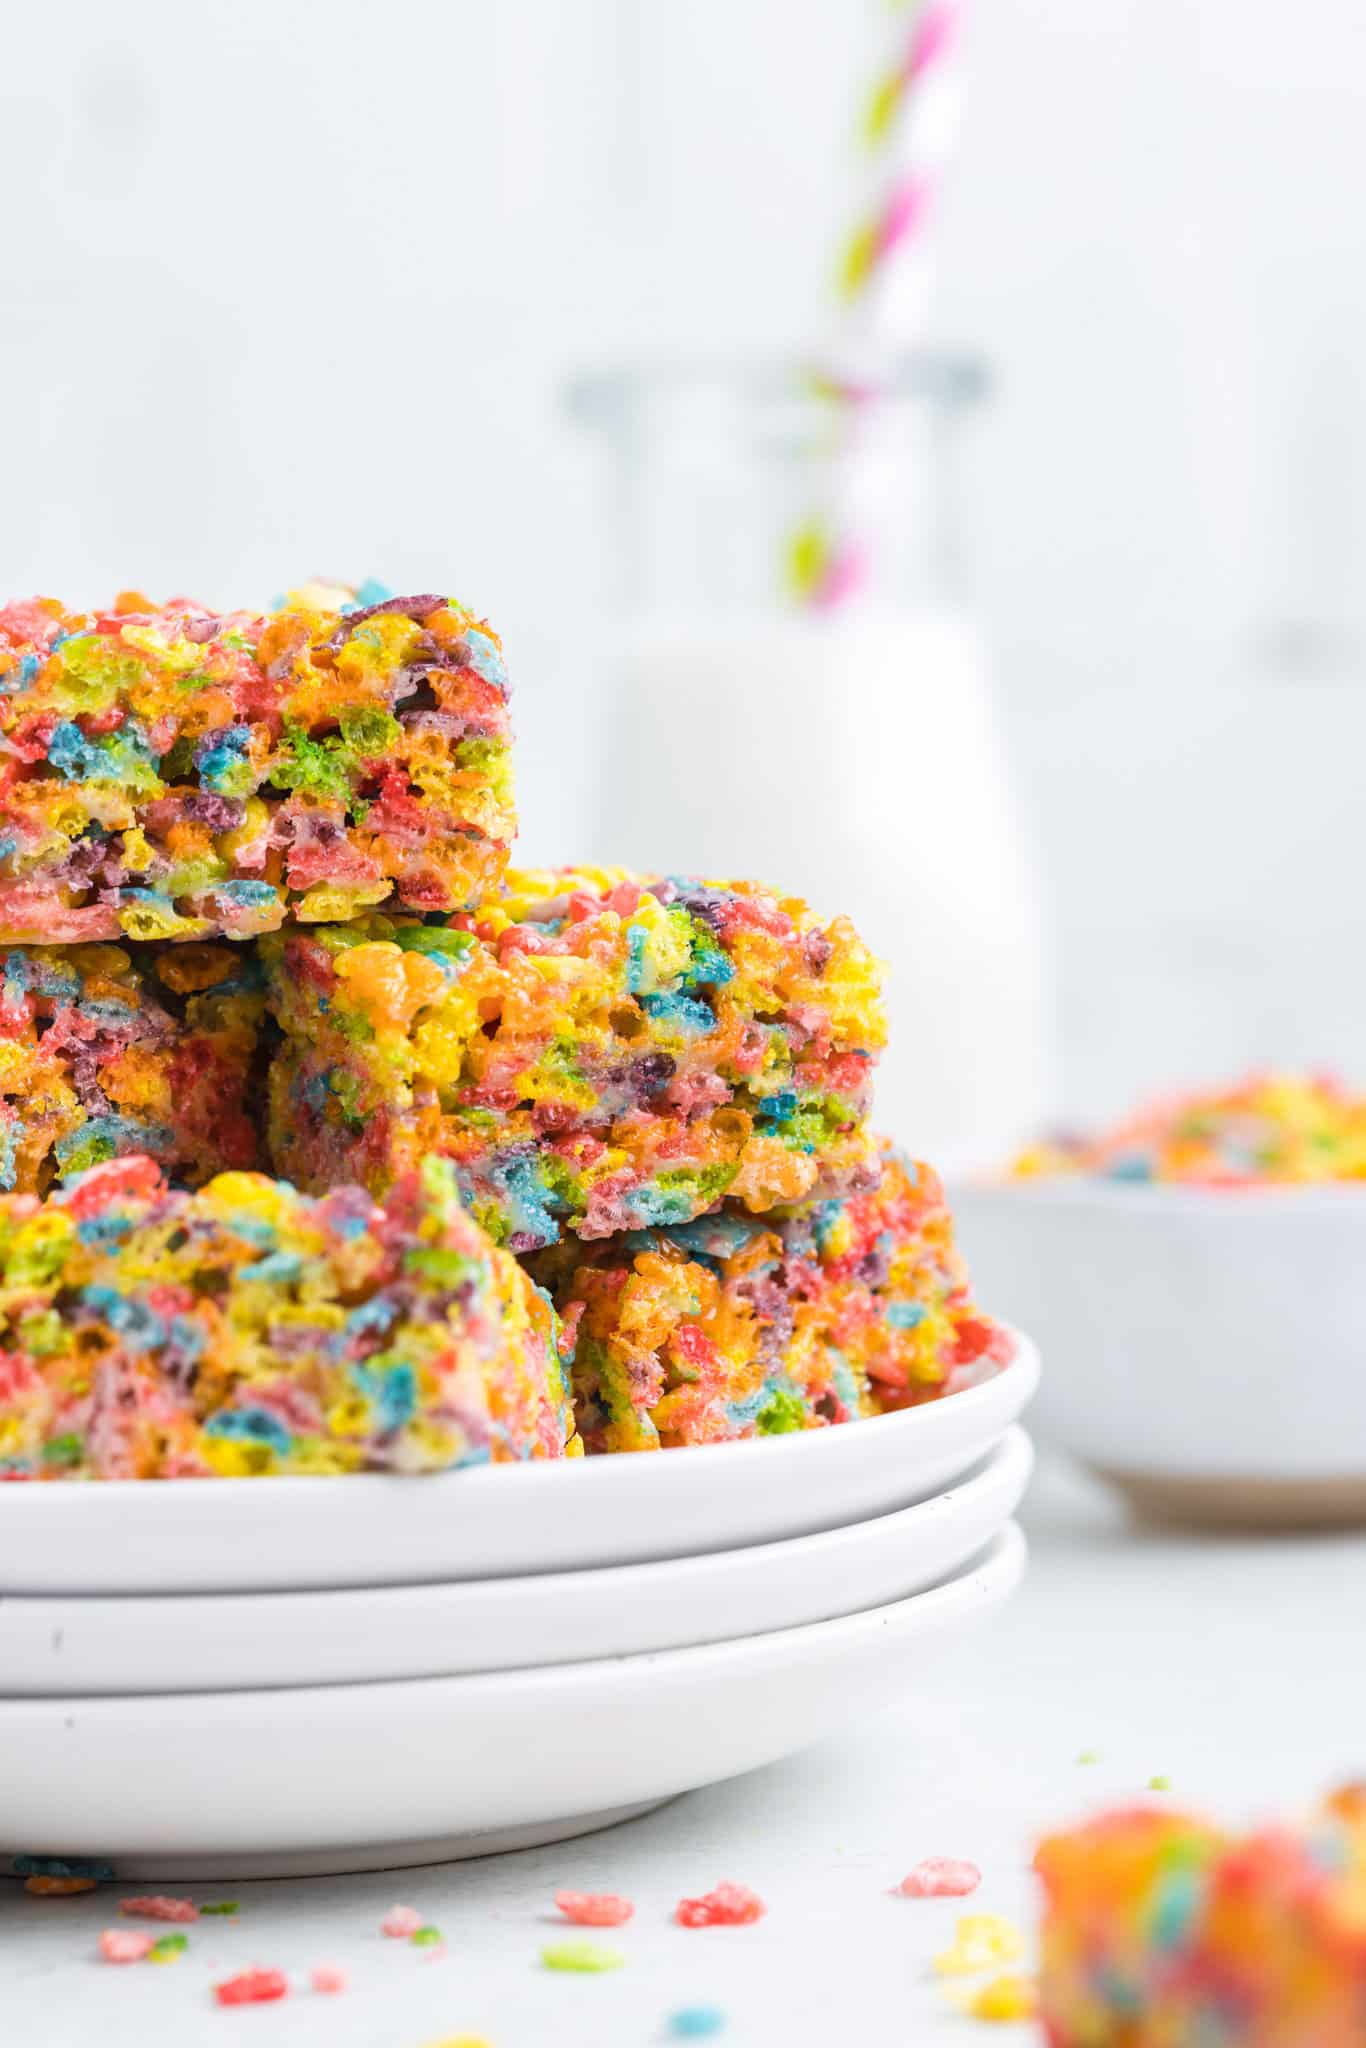 Fruity Pebbles Treats are delicious and colourful marshmallow cereal treats.